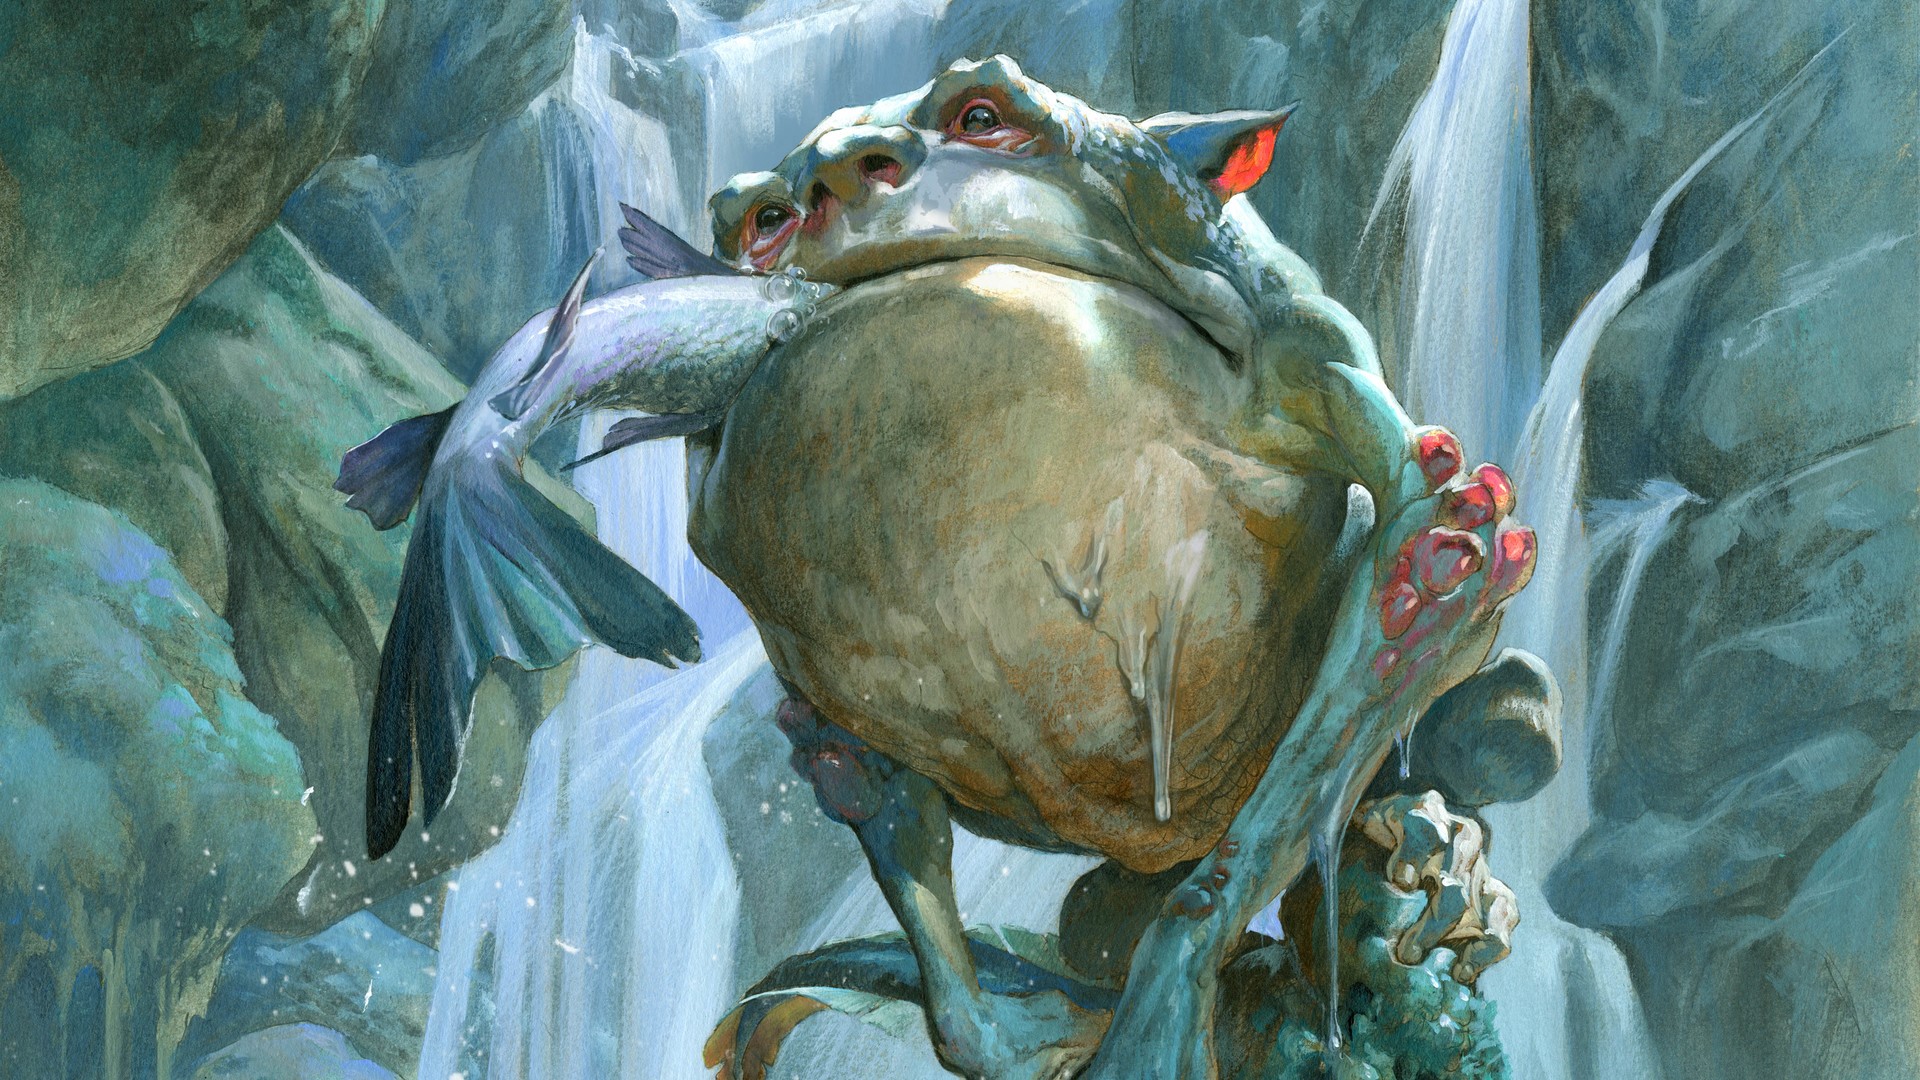 MTG hexproof: A mottled green humanoid eating a fish raw.